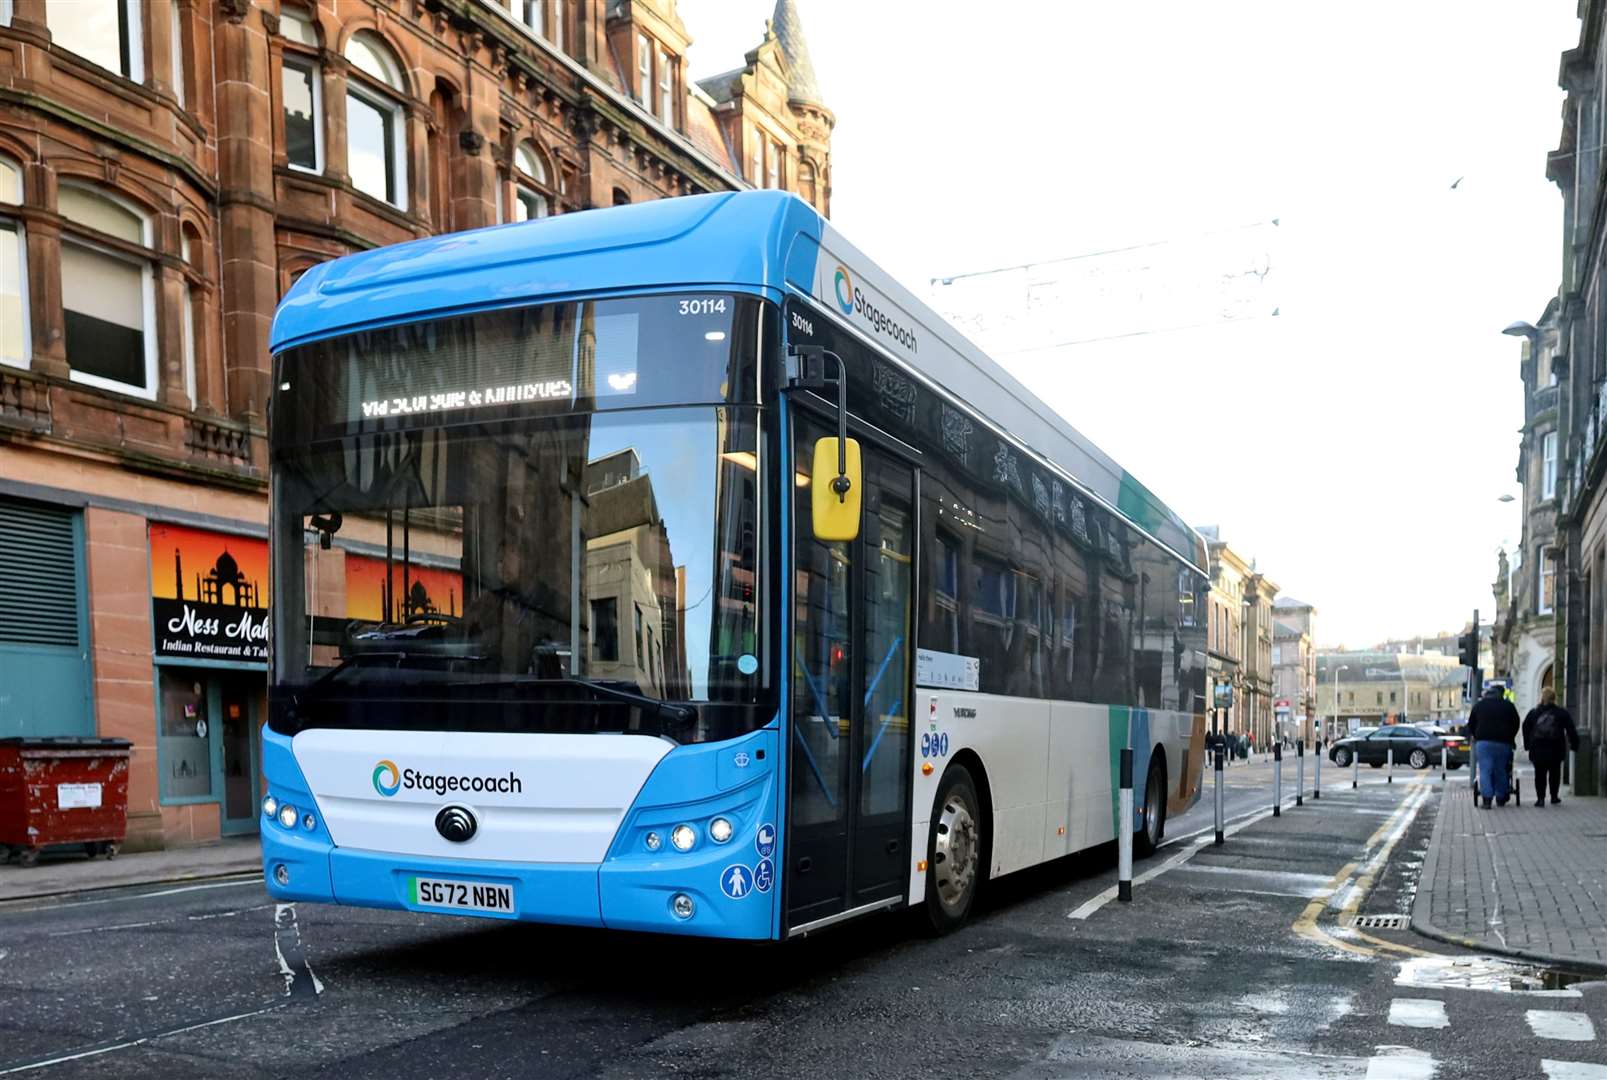 Free bus travel was available for a week on routes in the Inverness area.